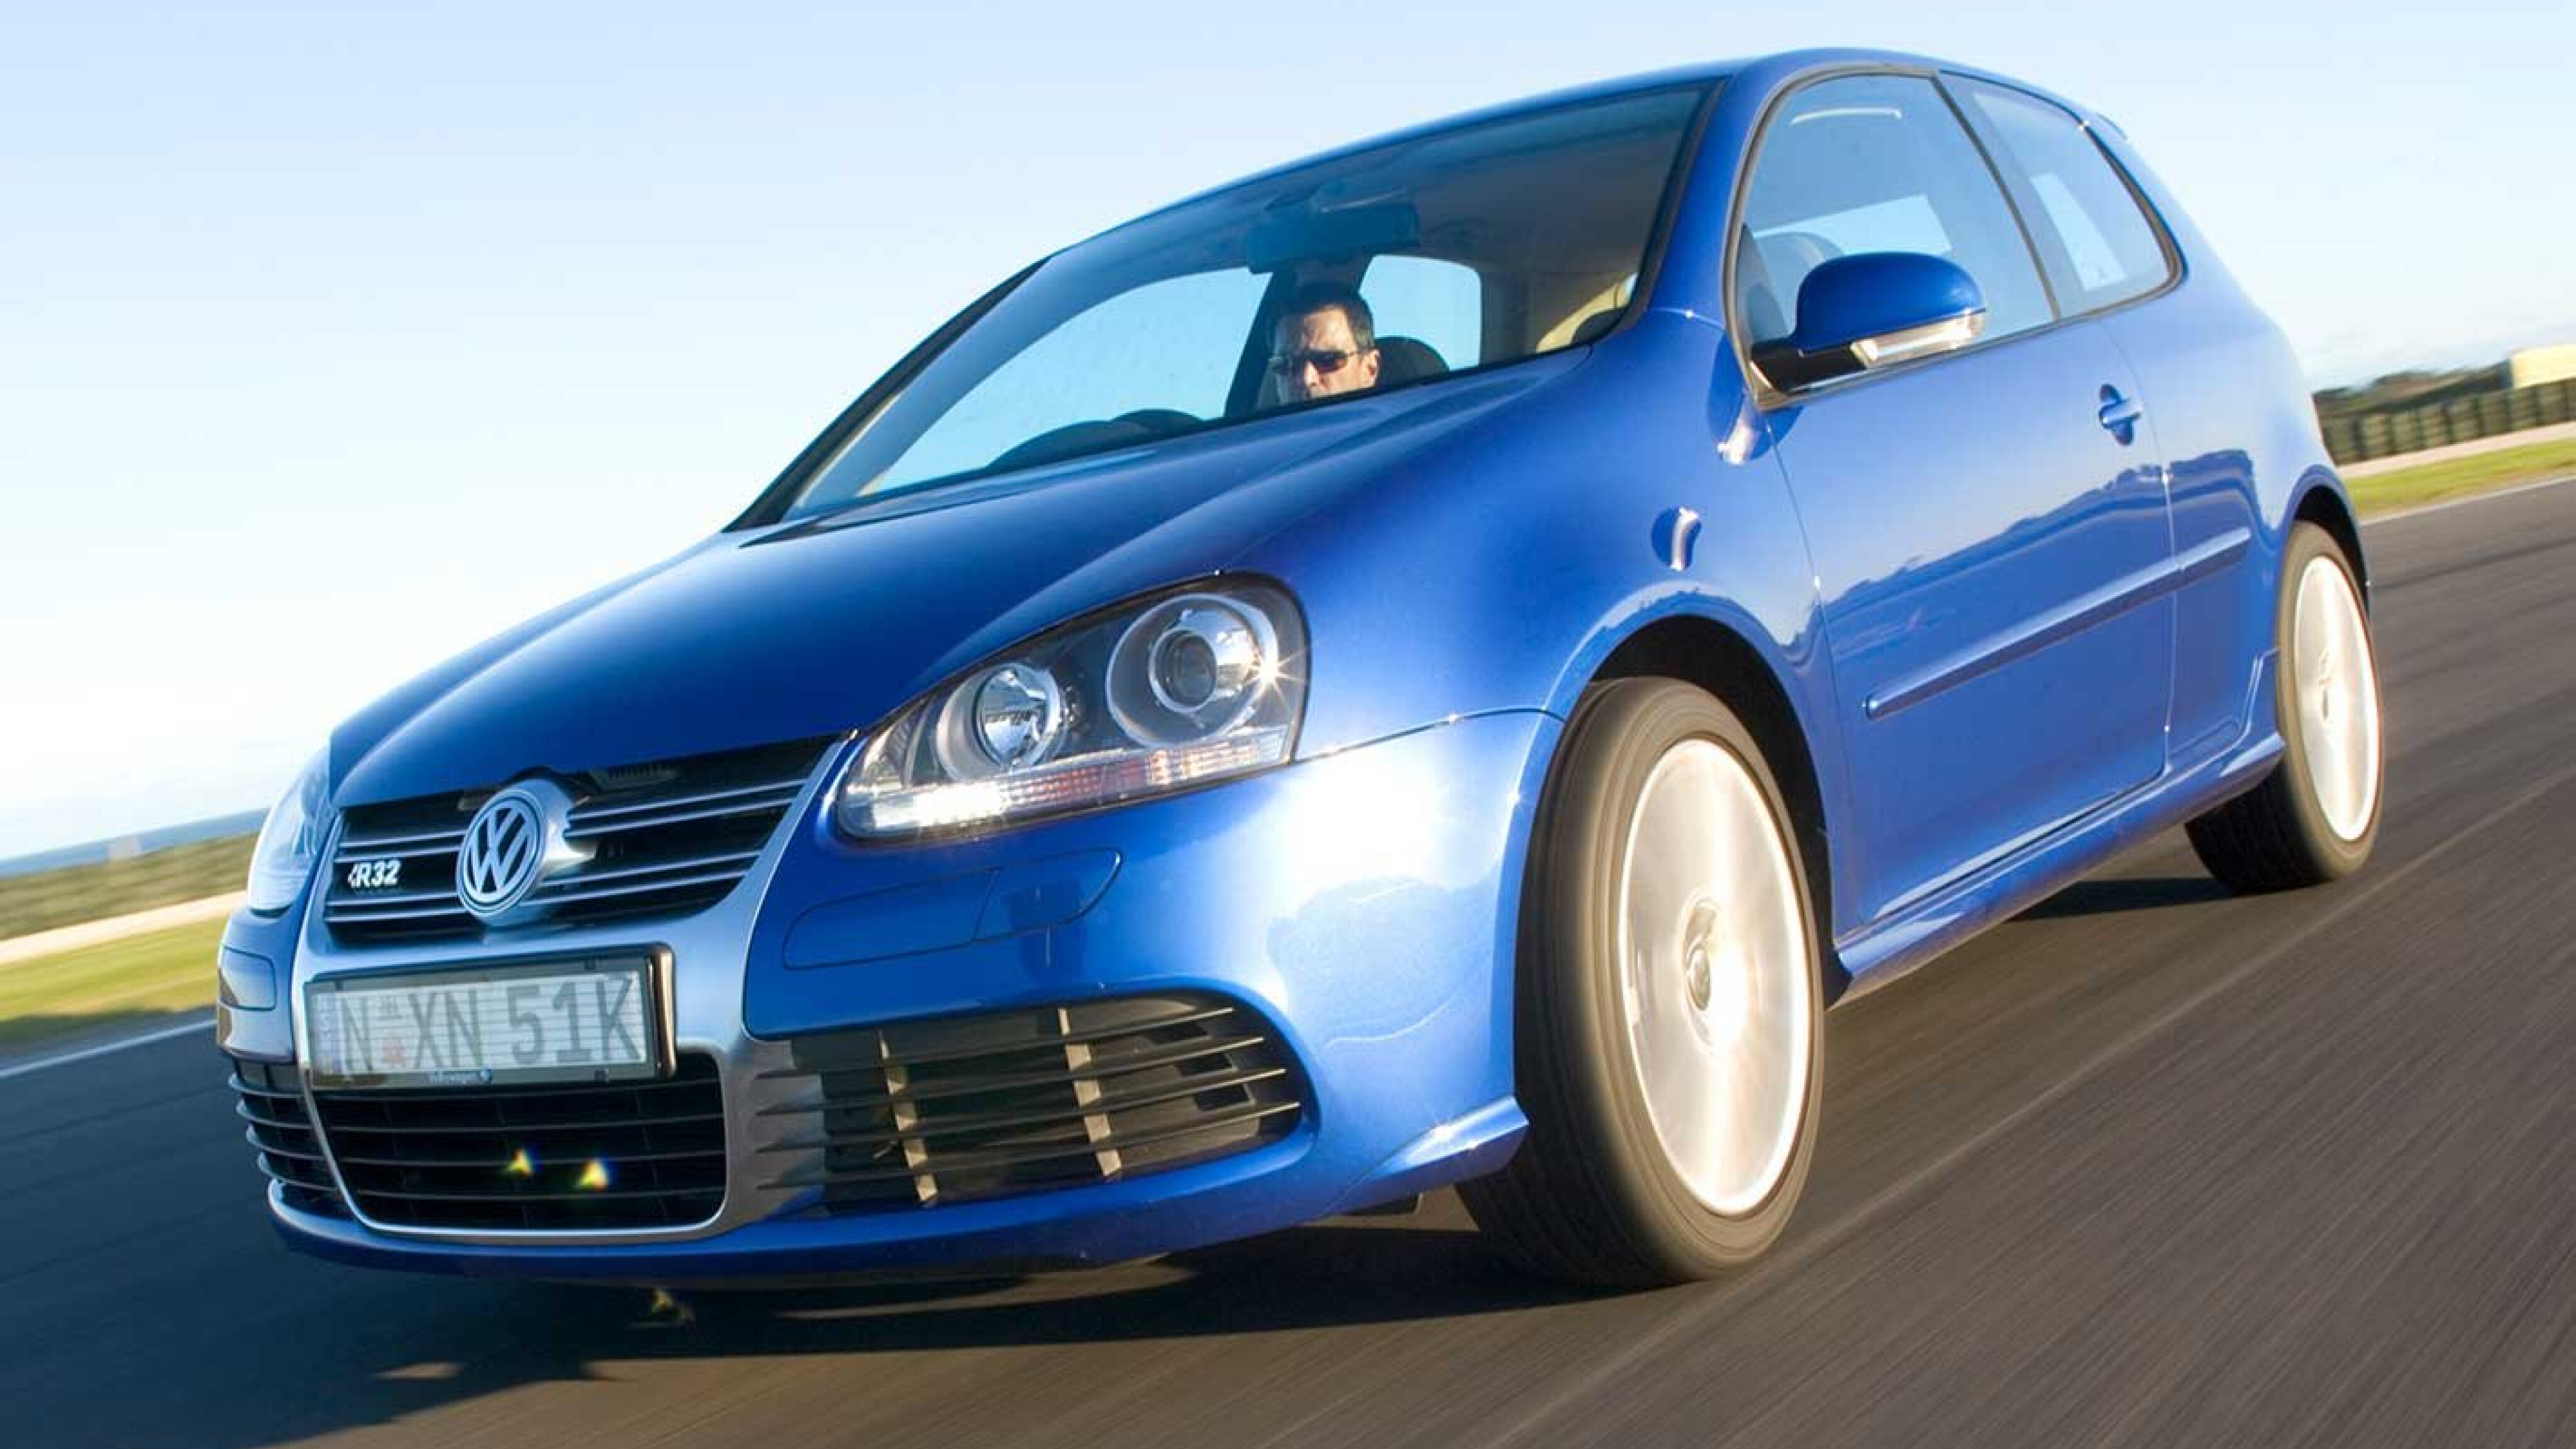 Volkswagen Golf Mk4 R32, Is this one to watch?